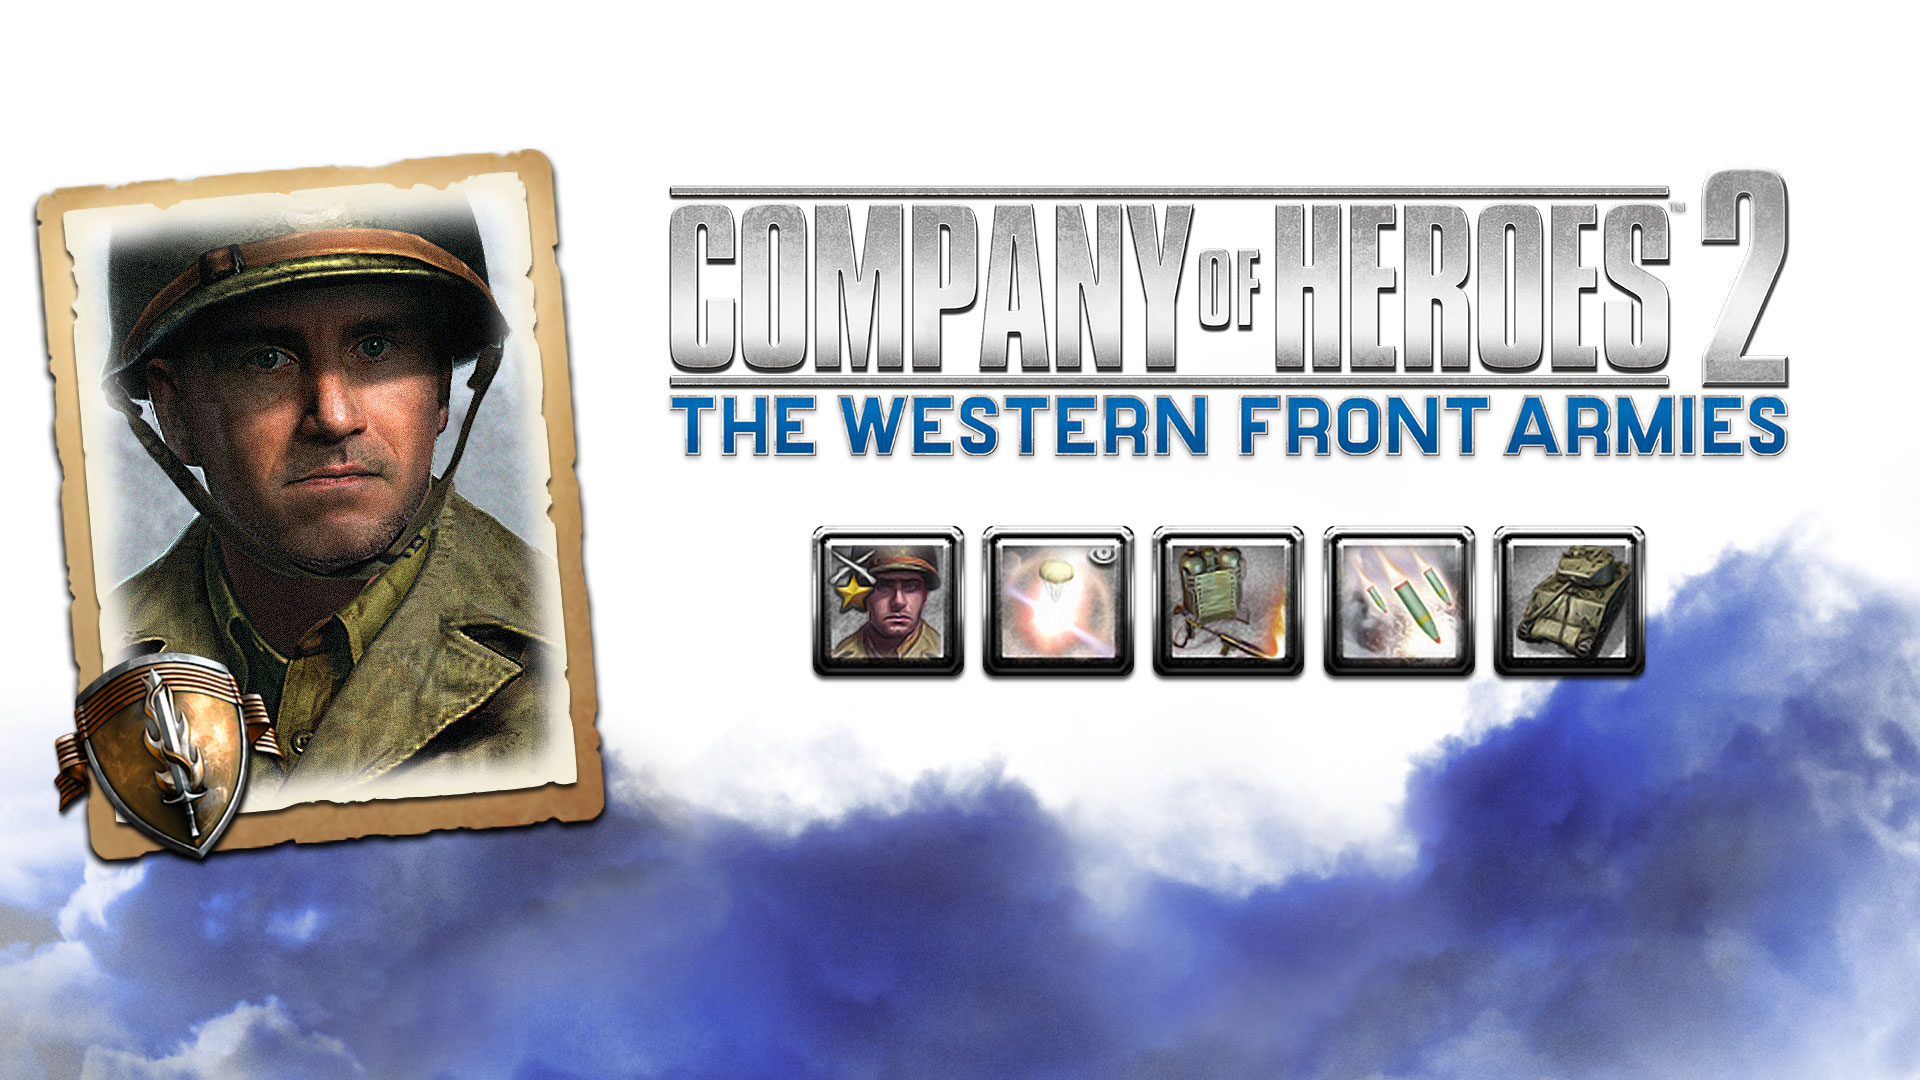 Company Of Heroes 2 - US Forces Commanders Collection DLC Steam CD Key